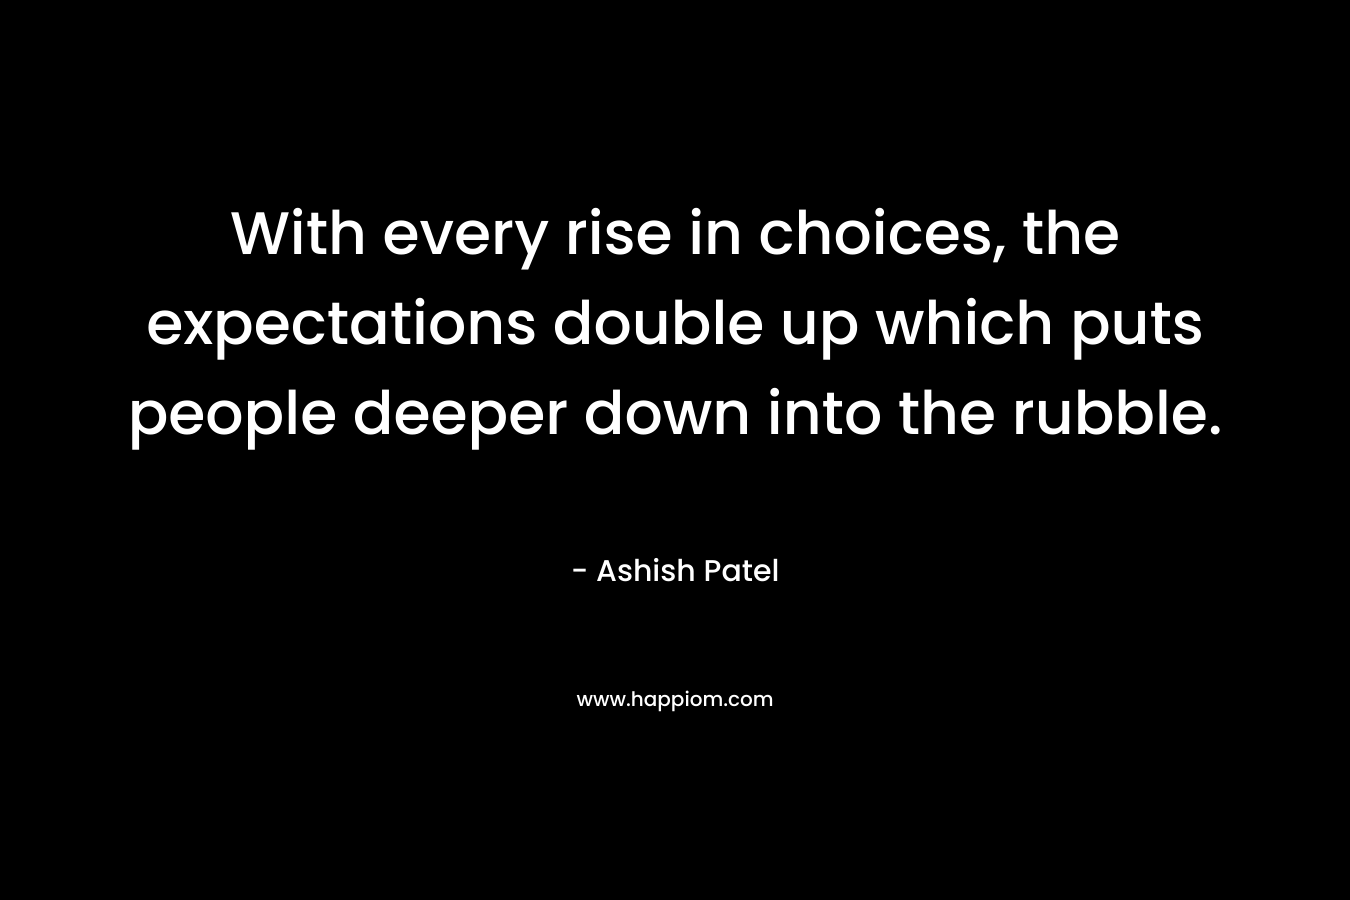 With every rise in choices, the expectations double up which puts people deeper down into the rubble.